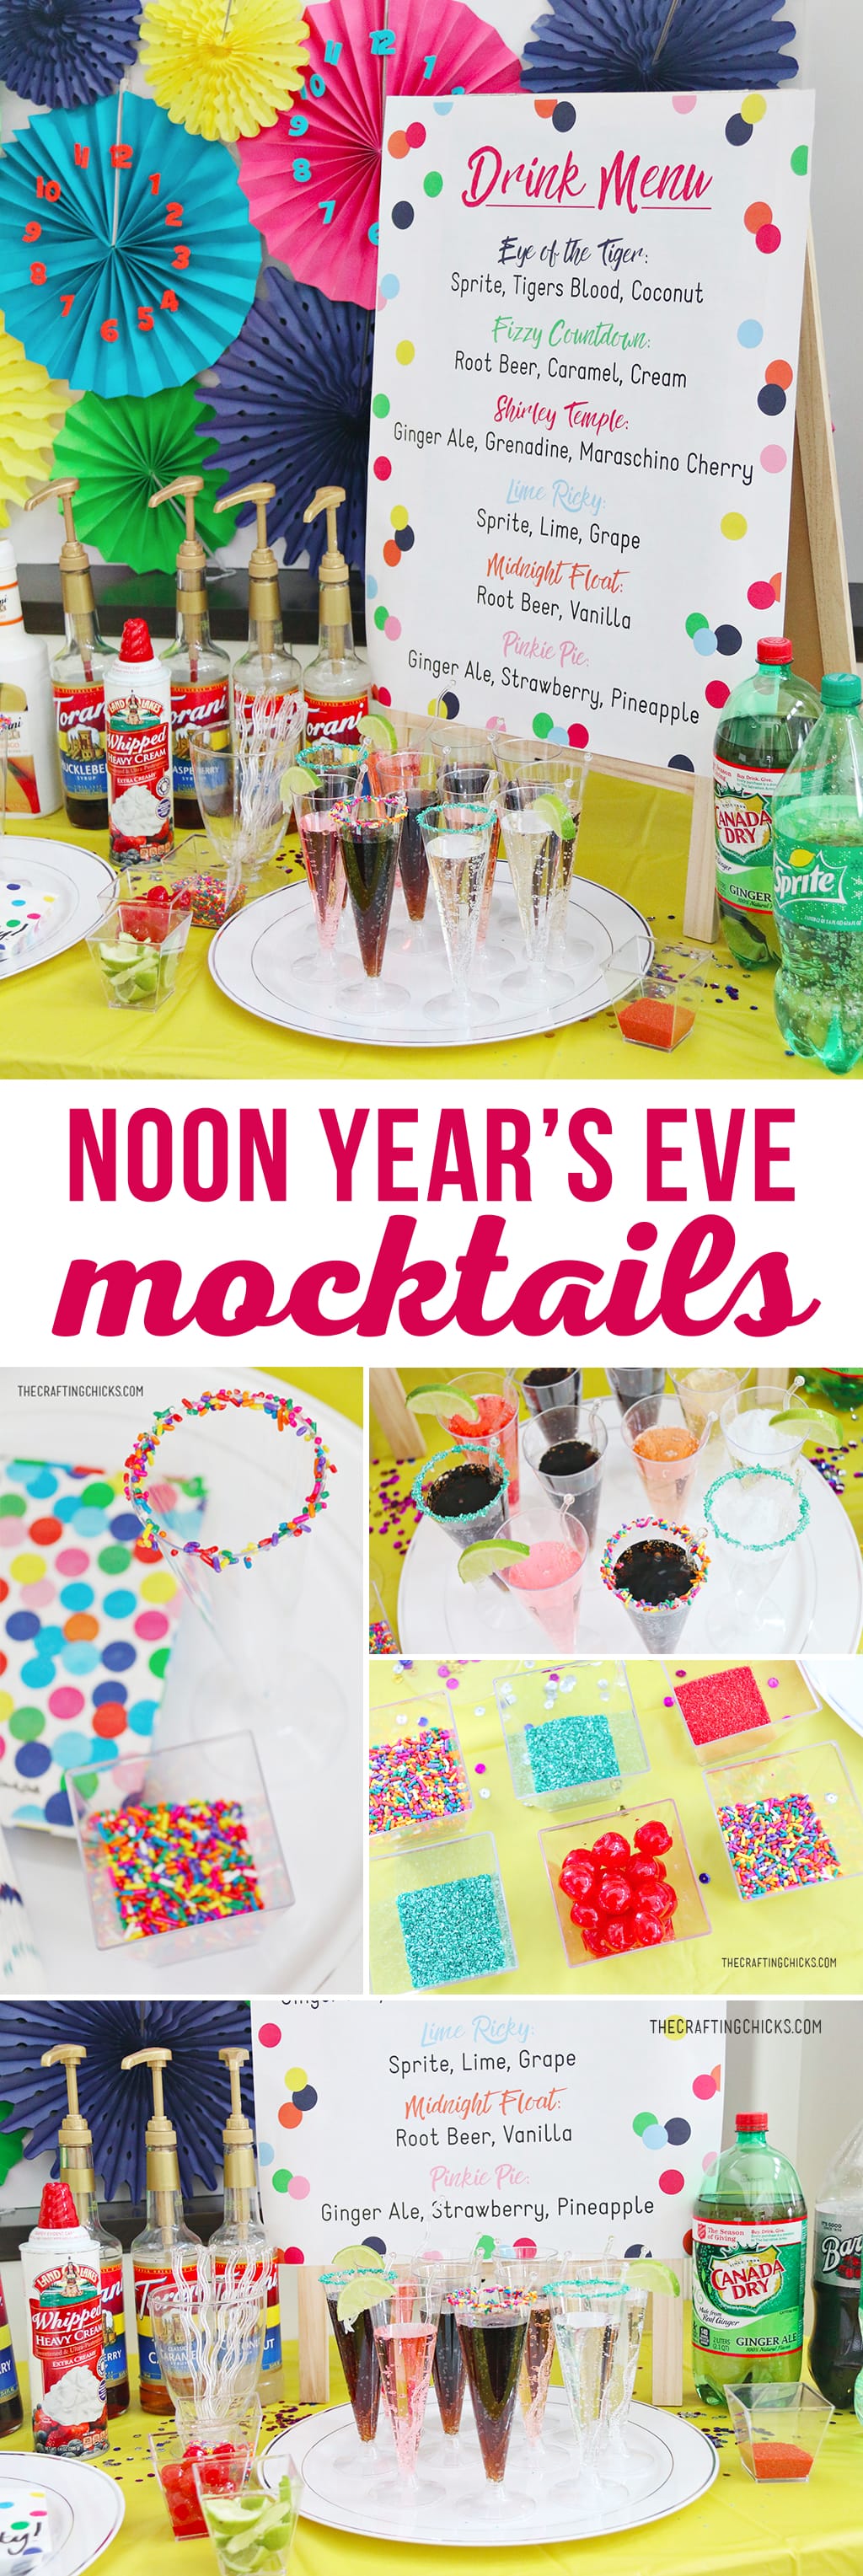 Mocktails for Kids Noon Year's Eve Party | Mocktails for Kids' is a great way to ring in the New Year or any party. We added this fun Printable Kids' Mocktail Menu to our Noon Year's Eve Party that we threw our kids and it was a hit.